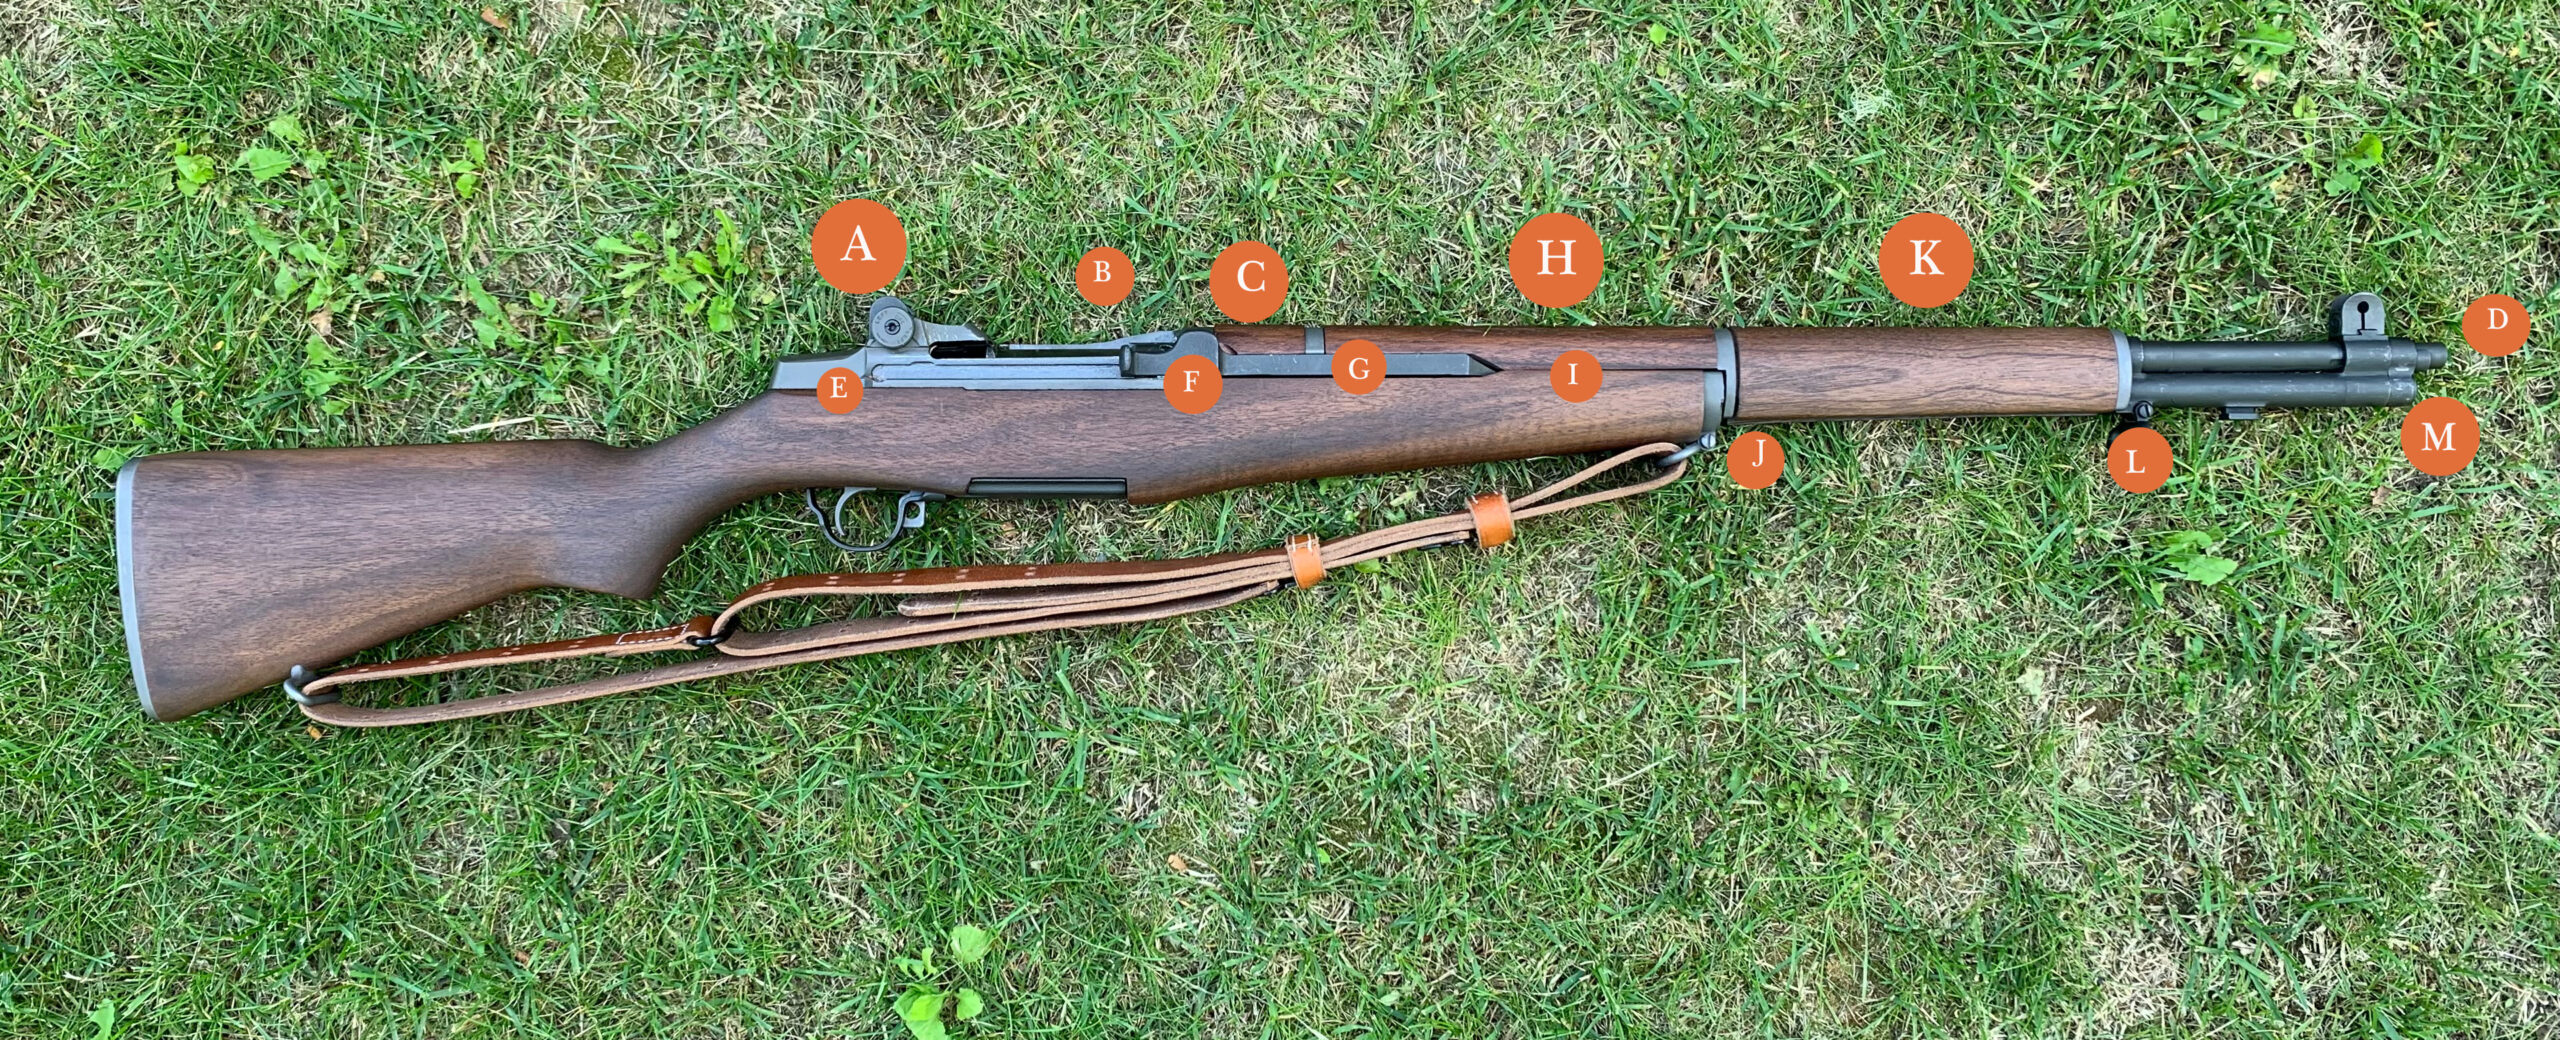 How to Glass Bed an M1A or Garand ~ In Just 25 Minutes! 